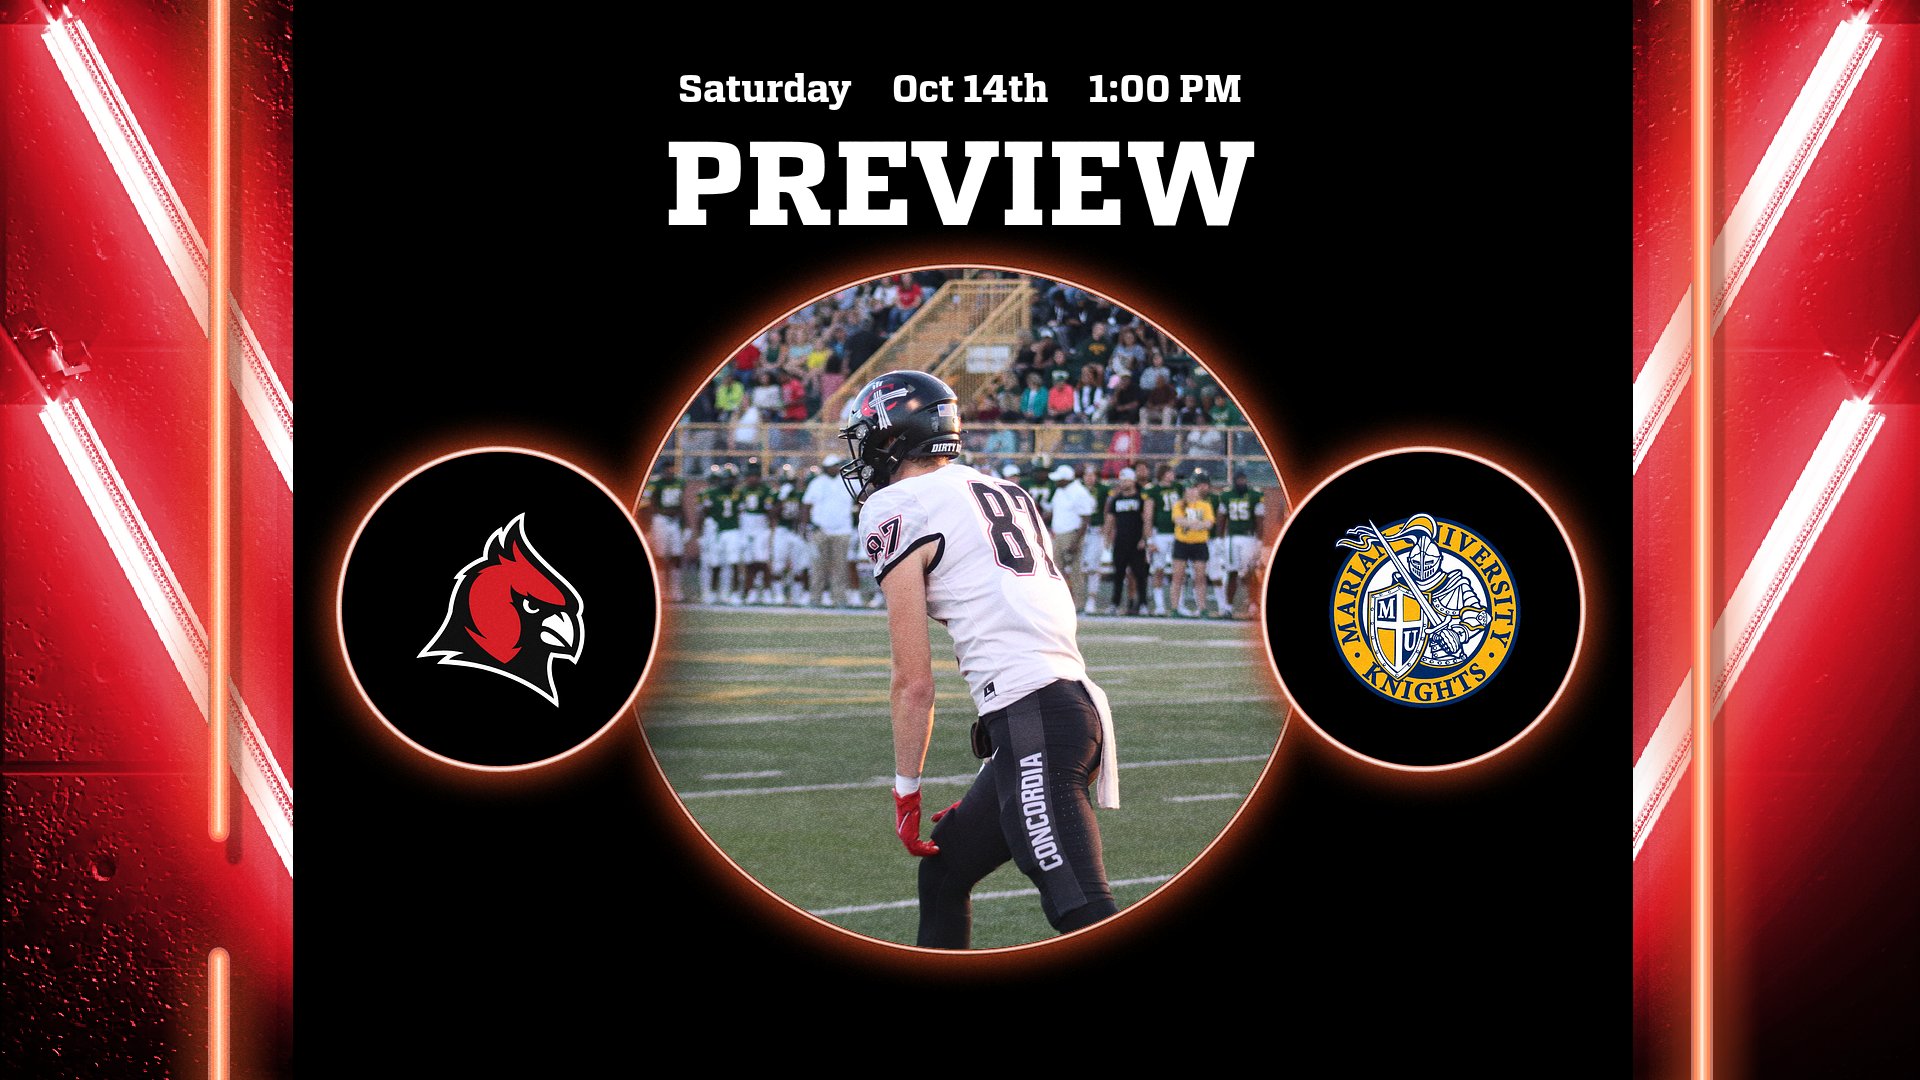 WEEK 6 GAME NOTES: FOOTBALL RETURNS HOME FOR TOP-10 CLASH WITH MARIAN